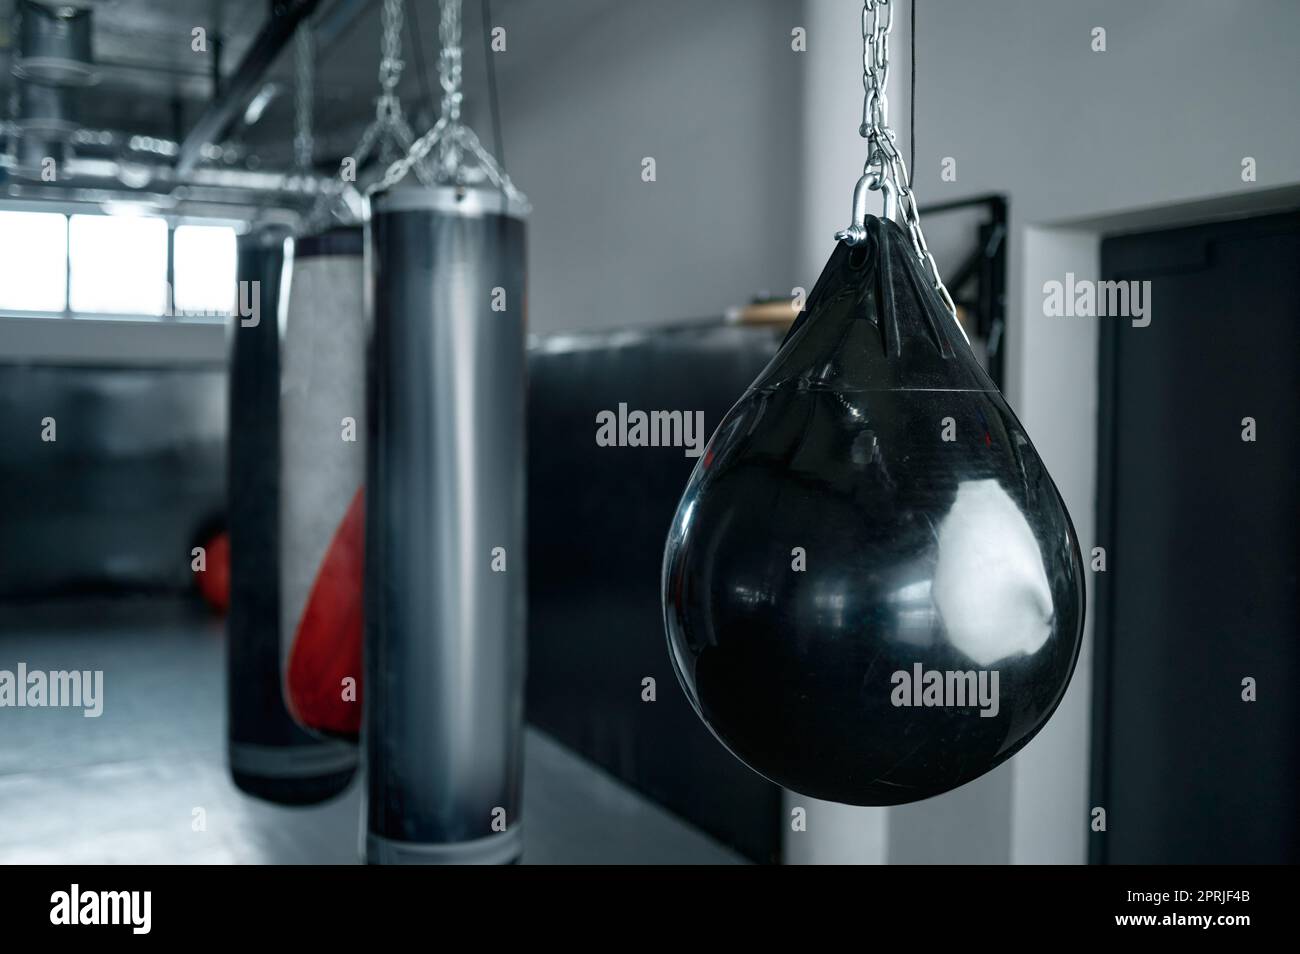 SanR Heavy Duty Steel Hanging chain for punching bag Punching Bag